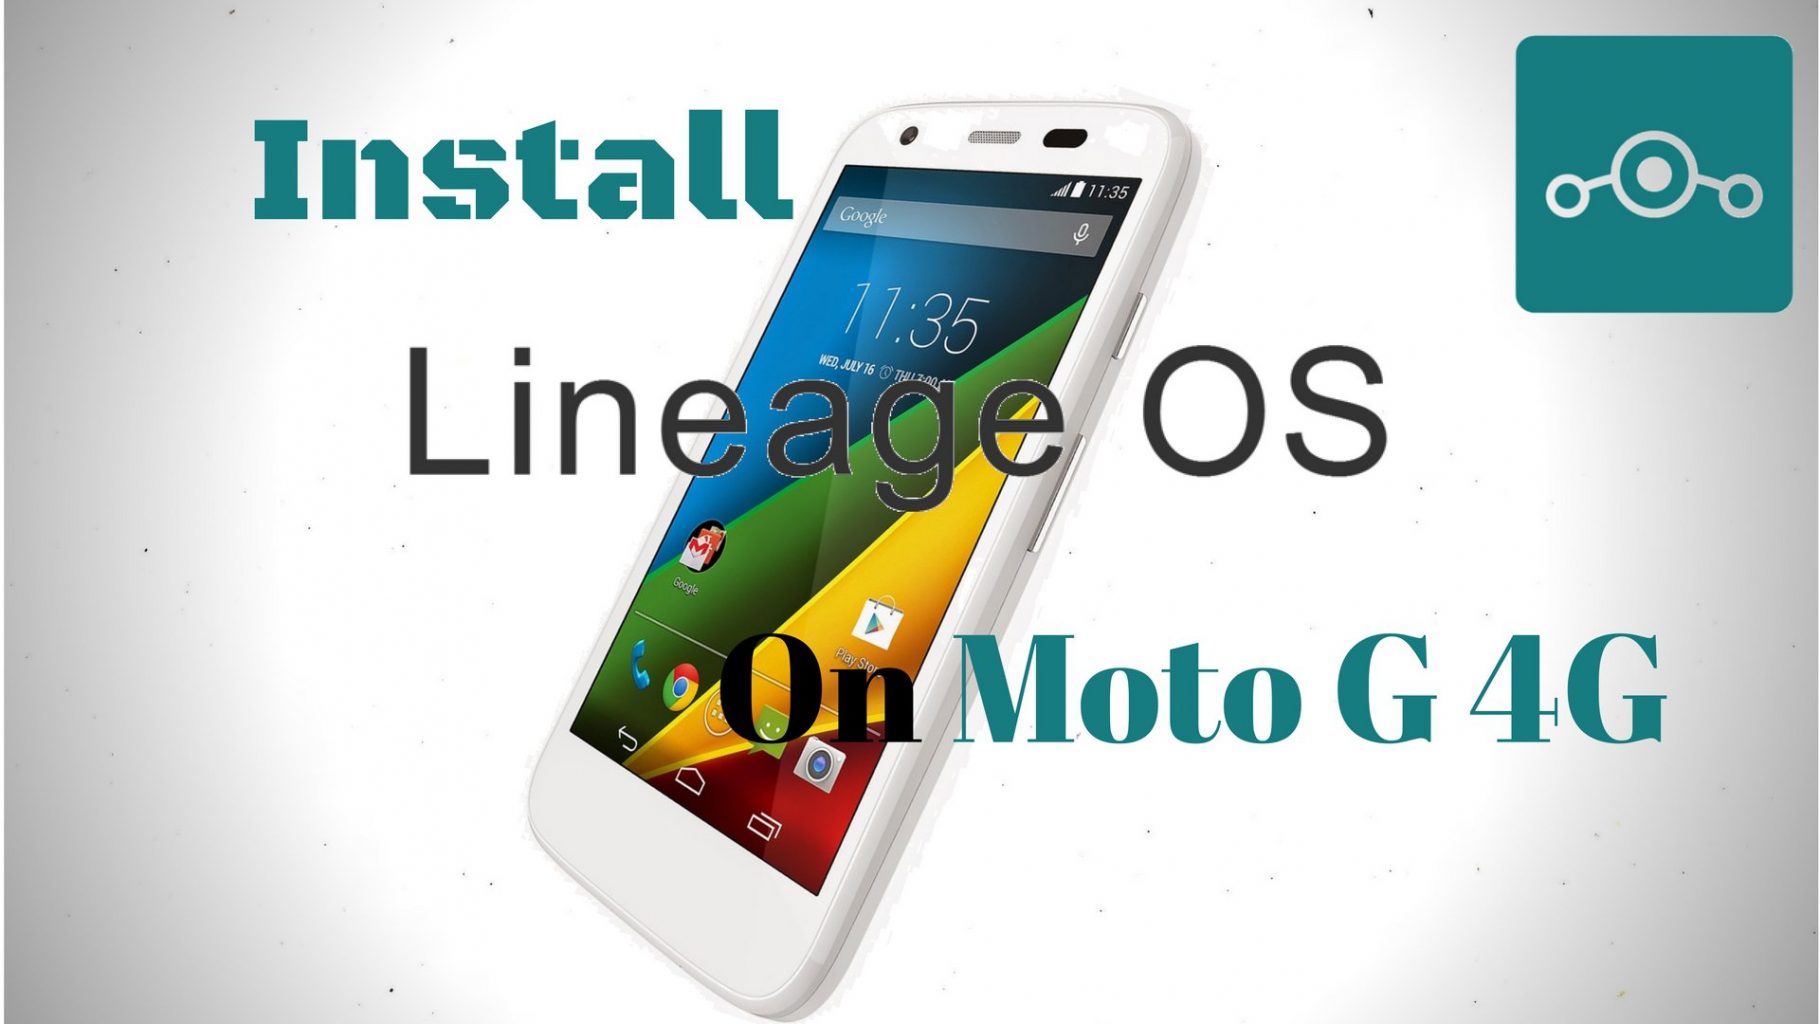 Lineage OS on Moto G 4G